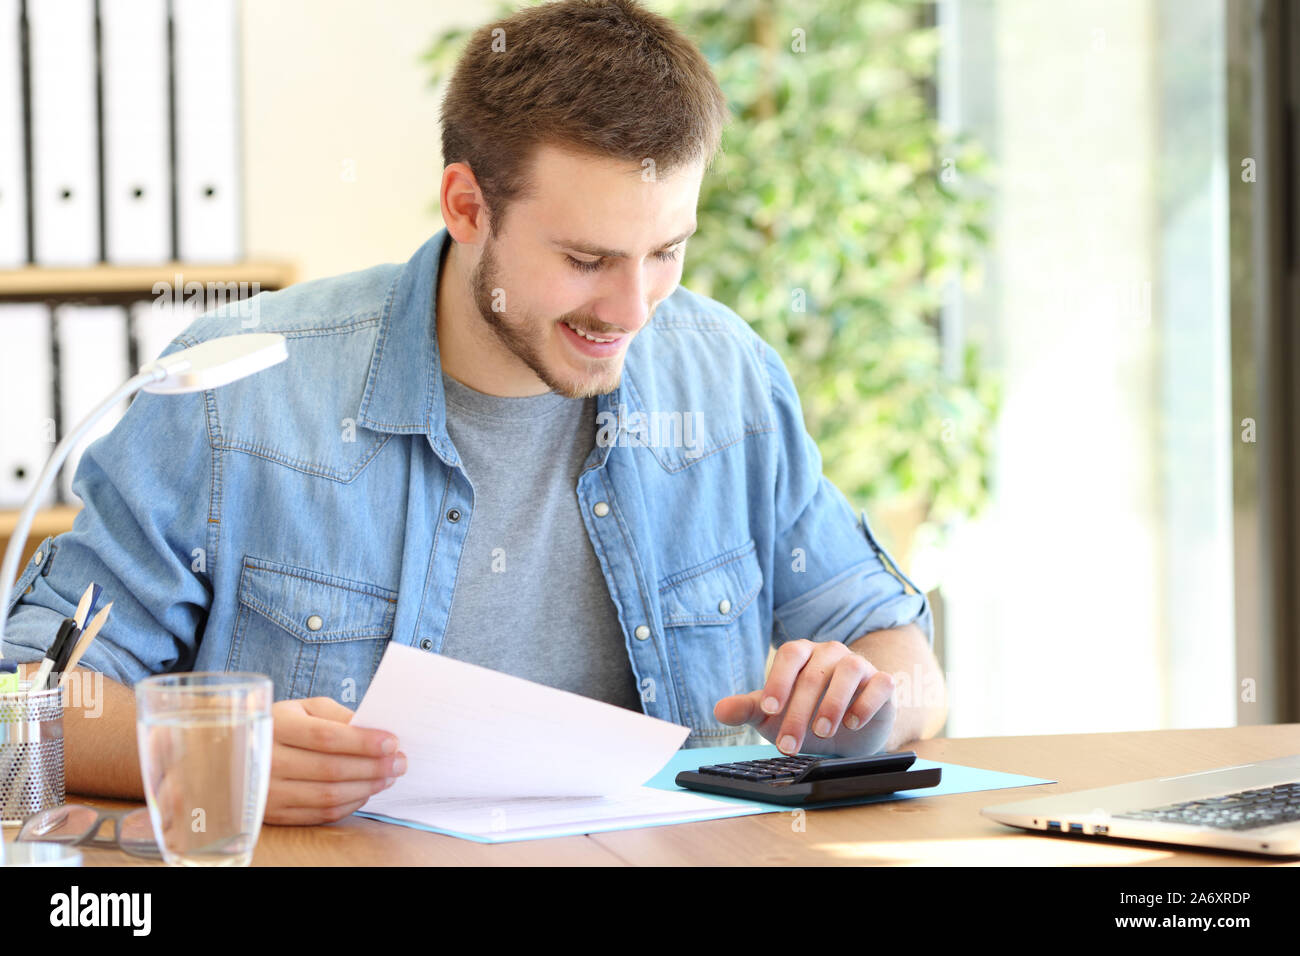 Happy entrepreneur calculating using a calculator sitting on a chair working at office Stock Photo